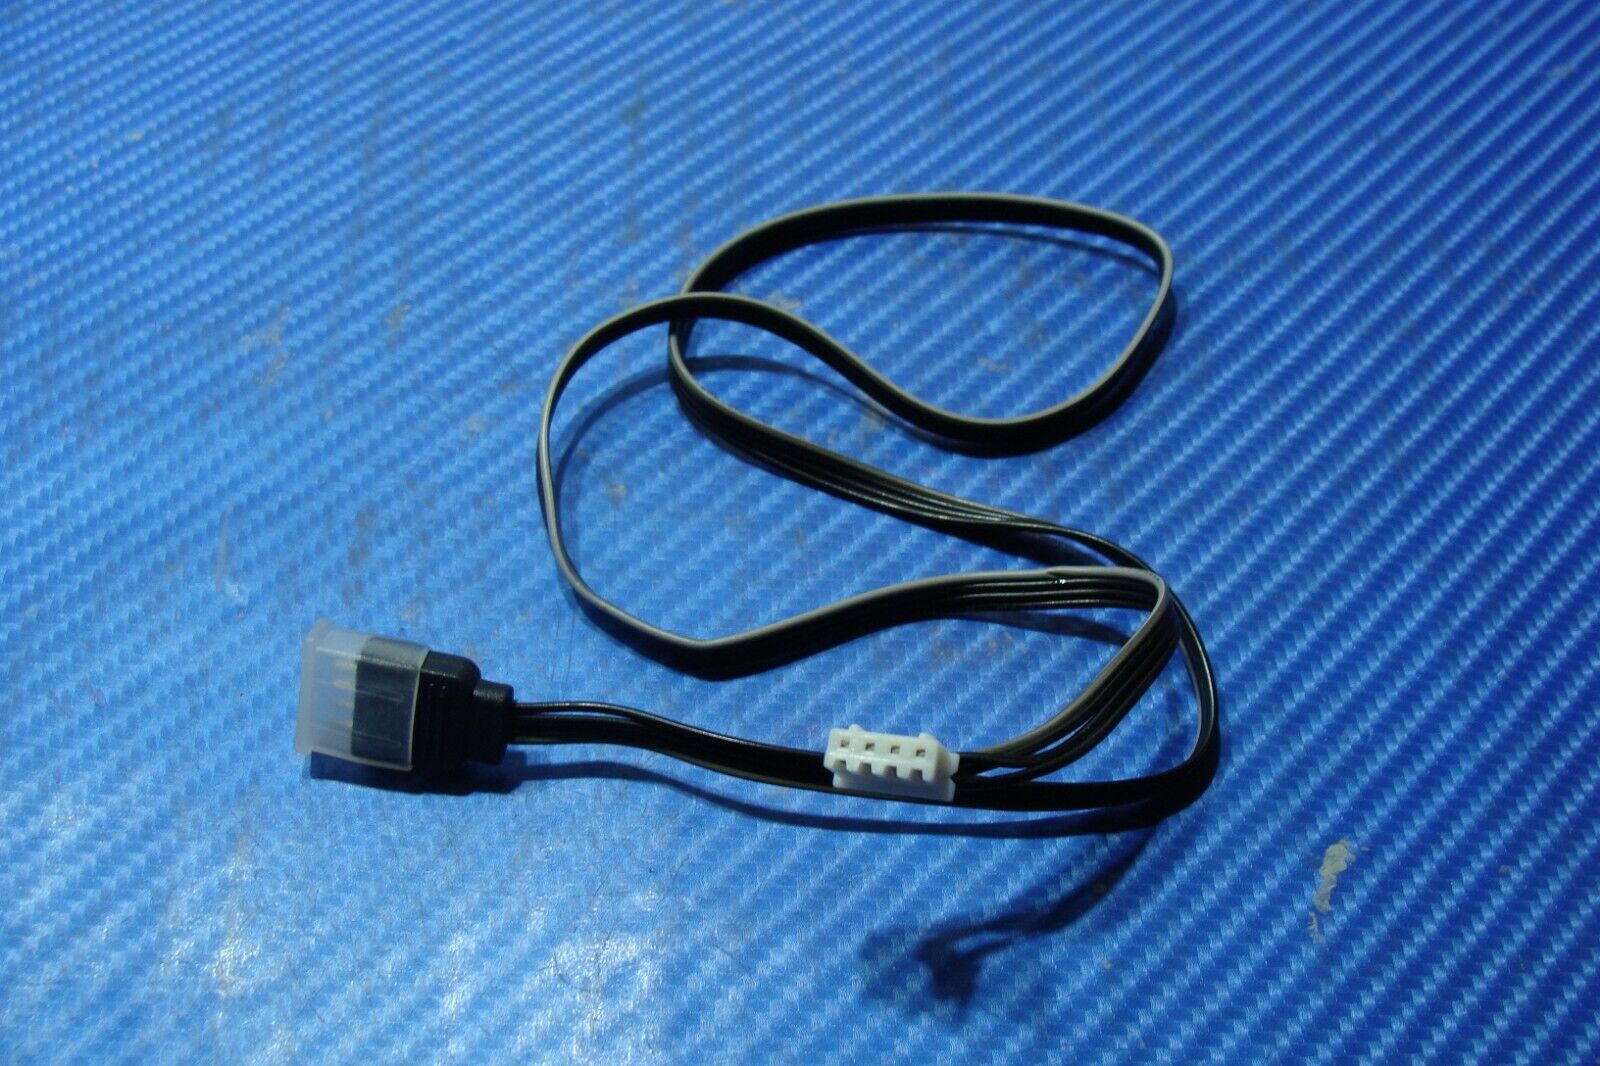 CyberPower PC GUA882 Genuine Desktop Power Cable ER*